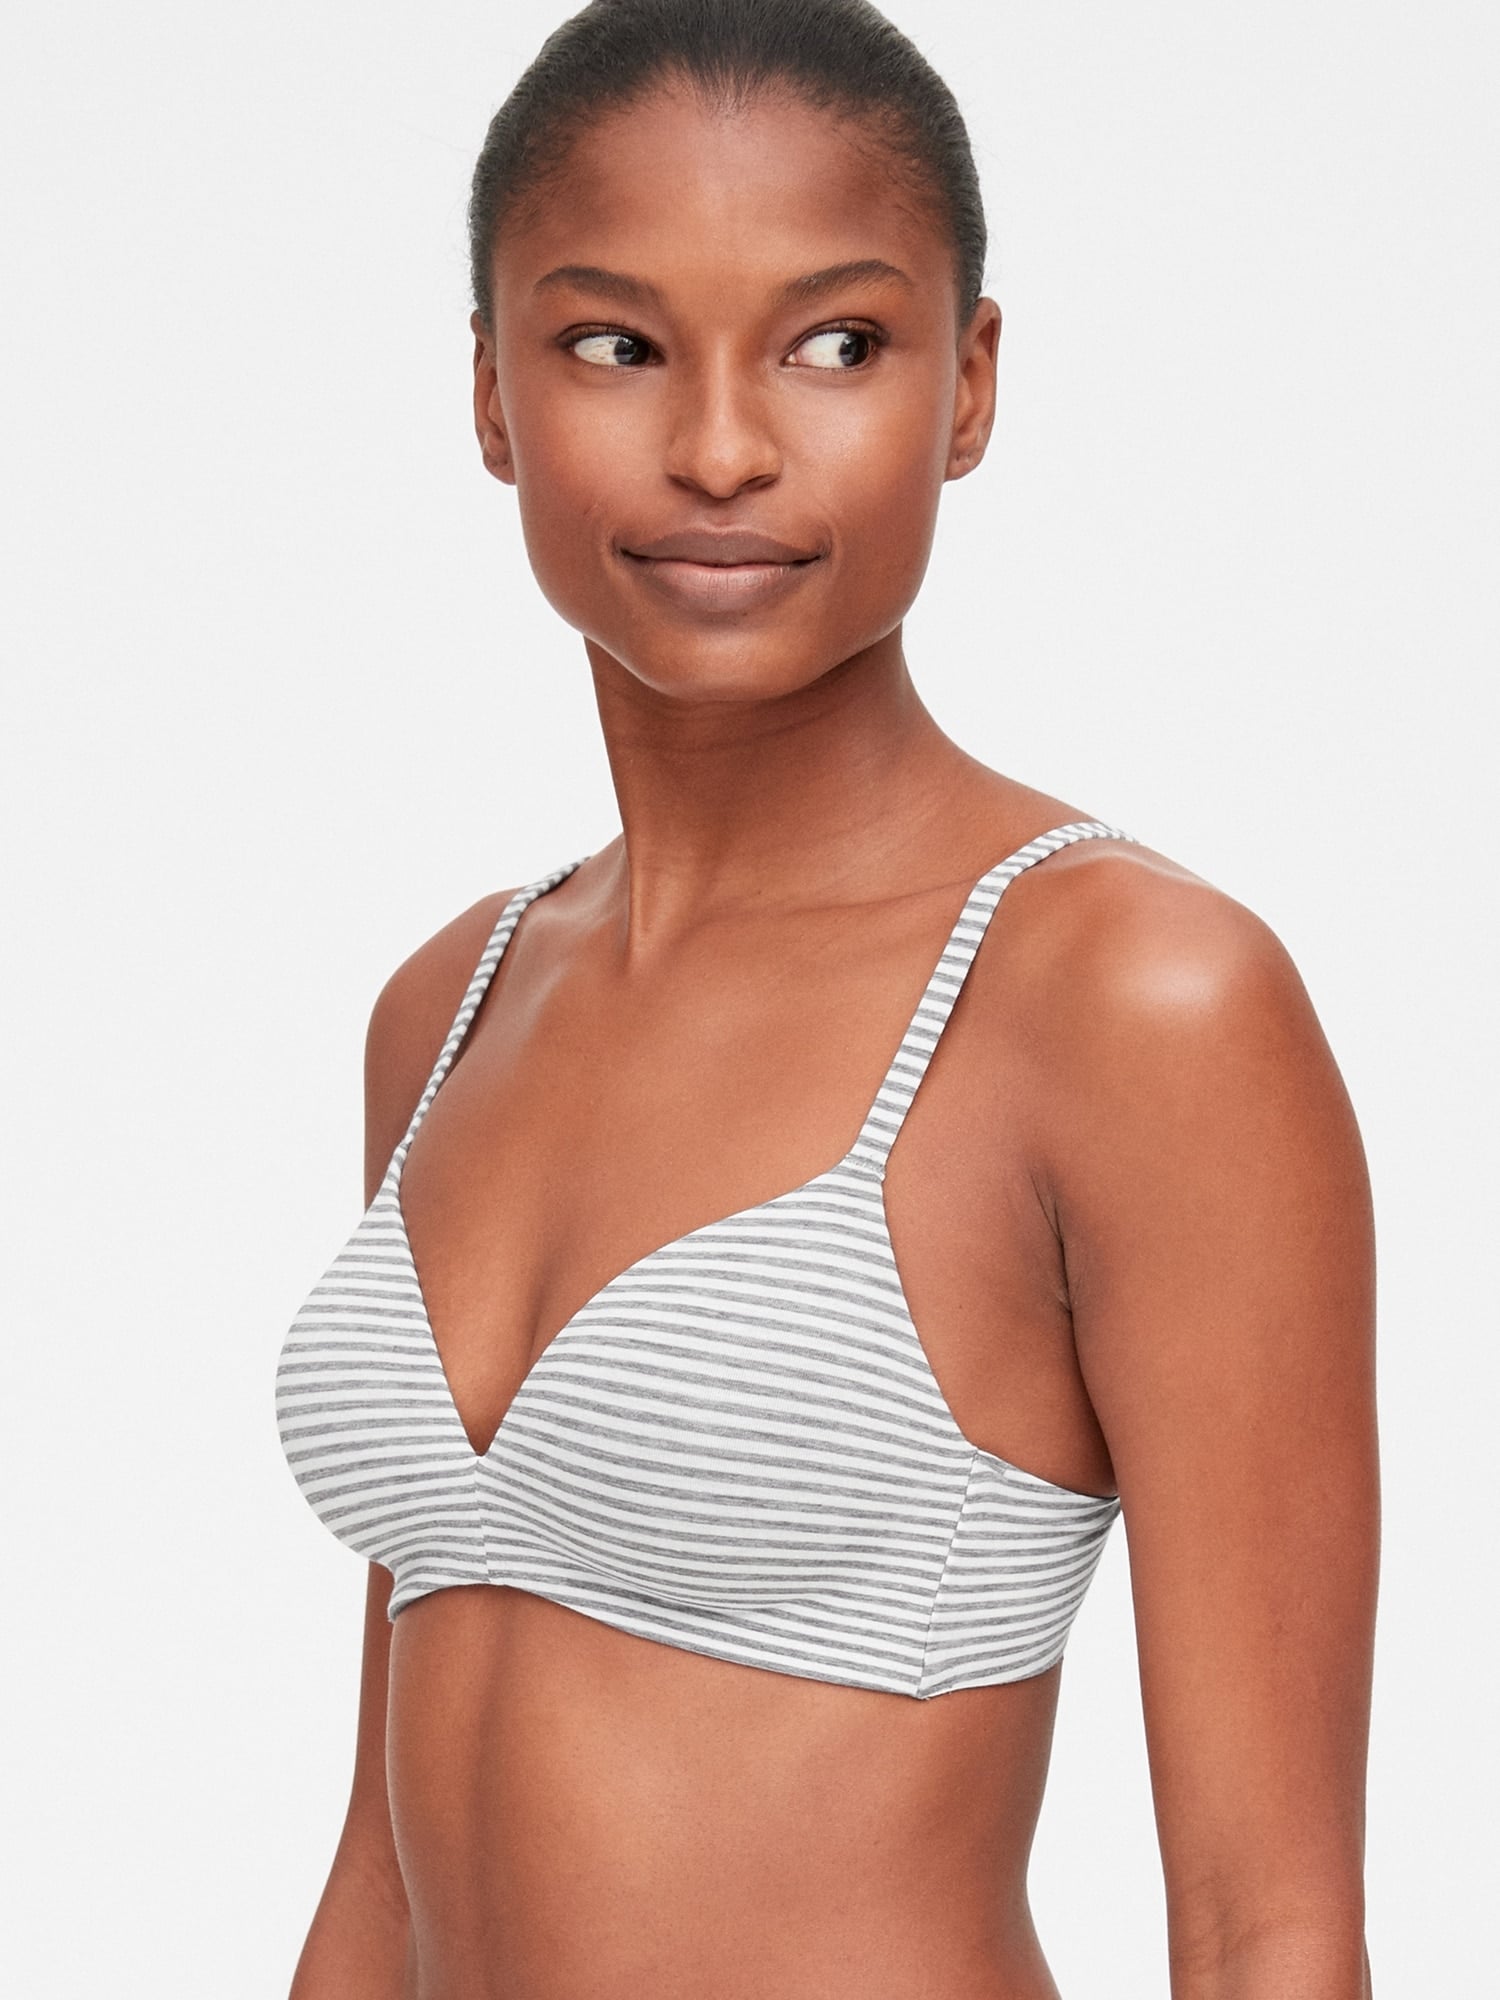 Most Comfortable Bralette From Gap, Editor Review